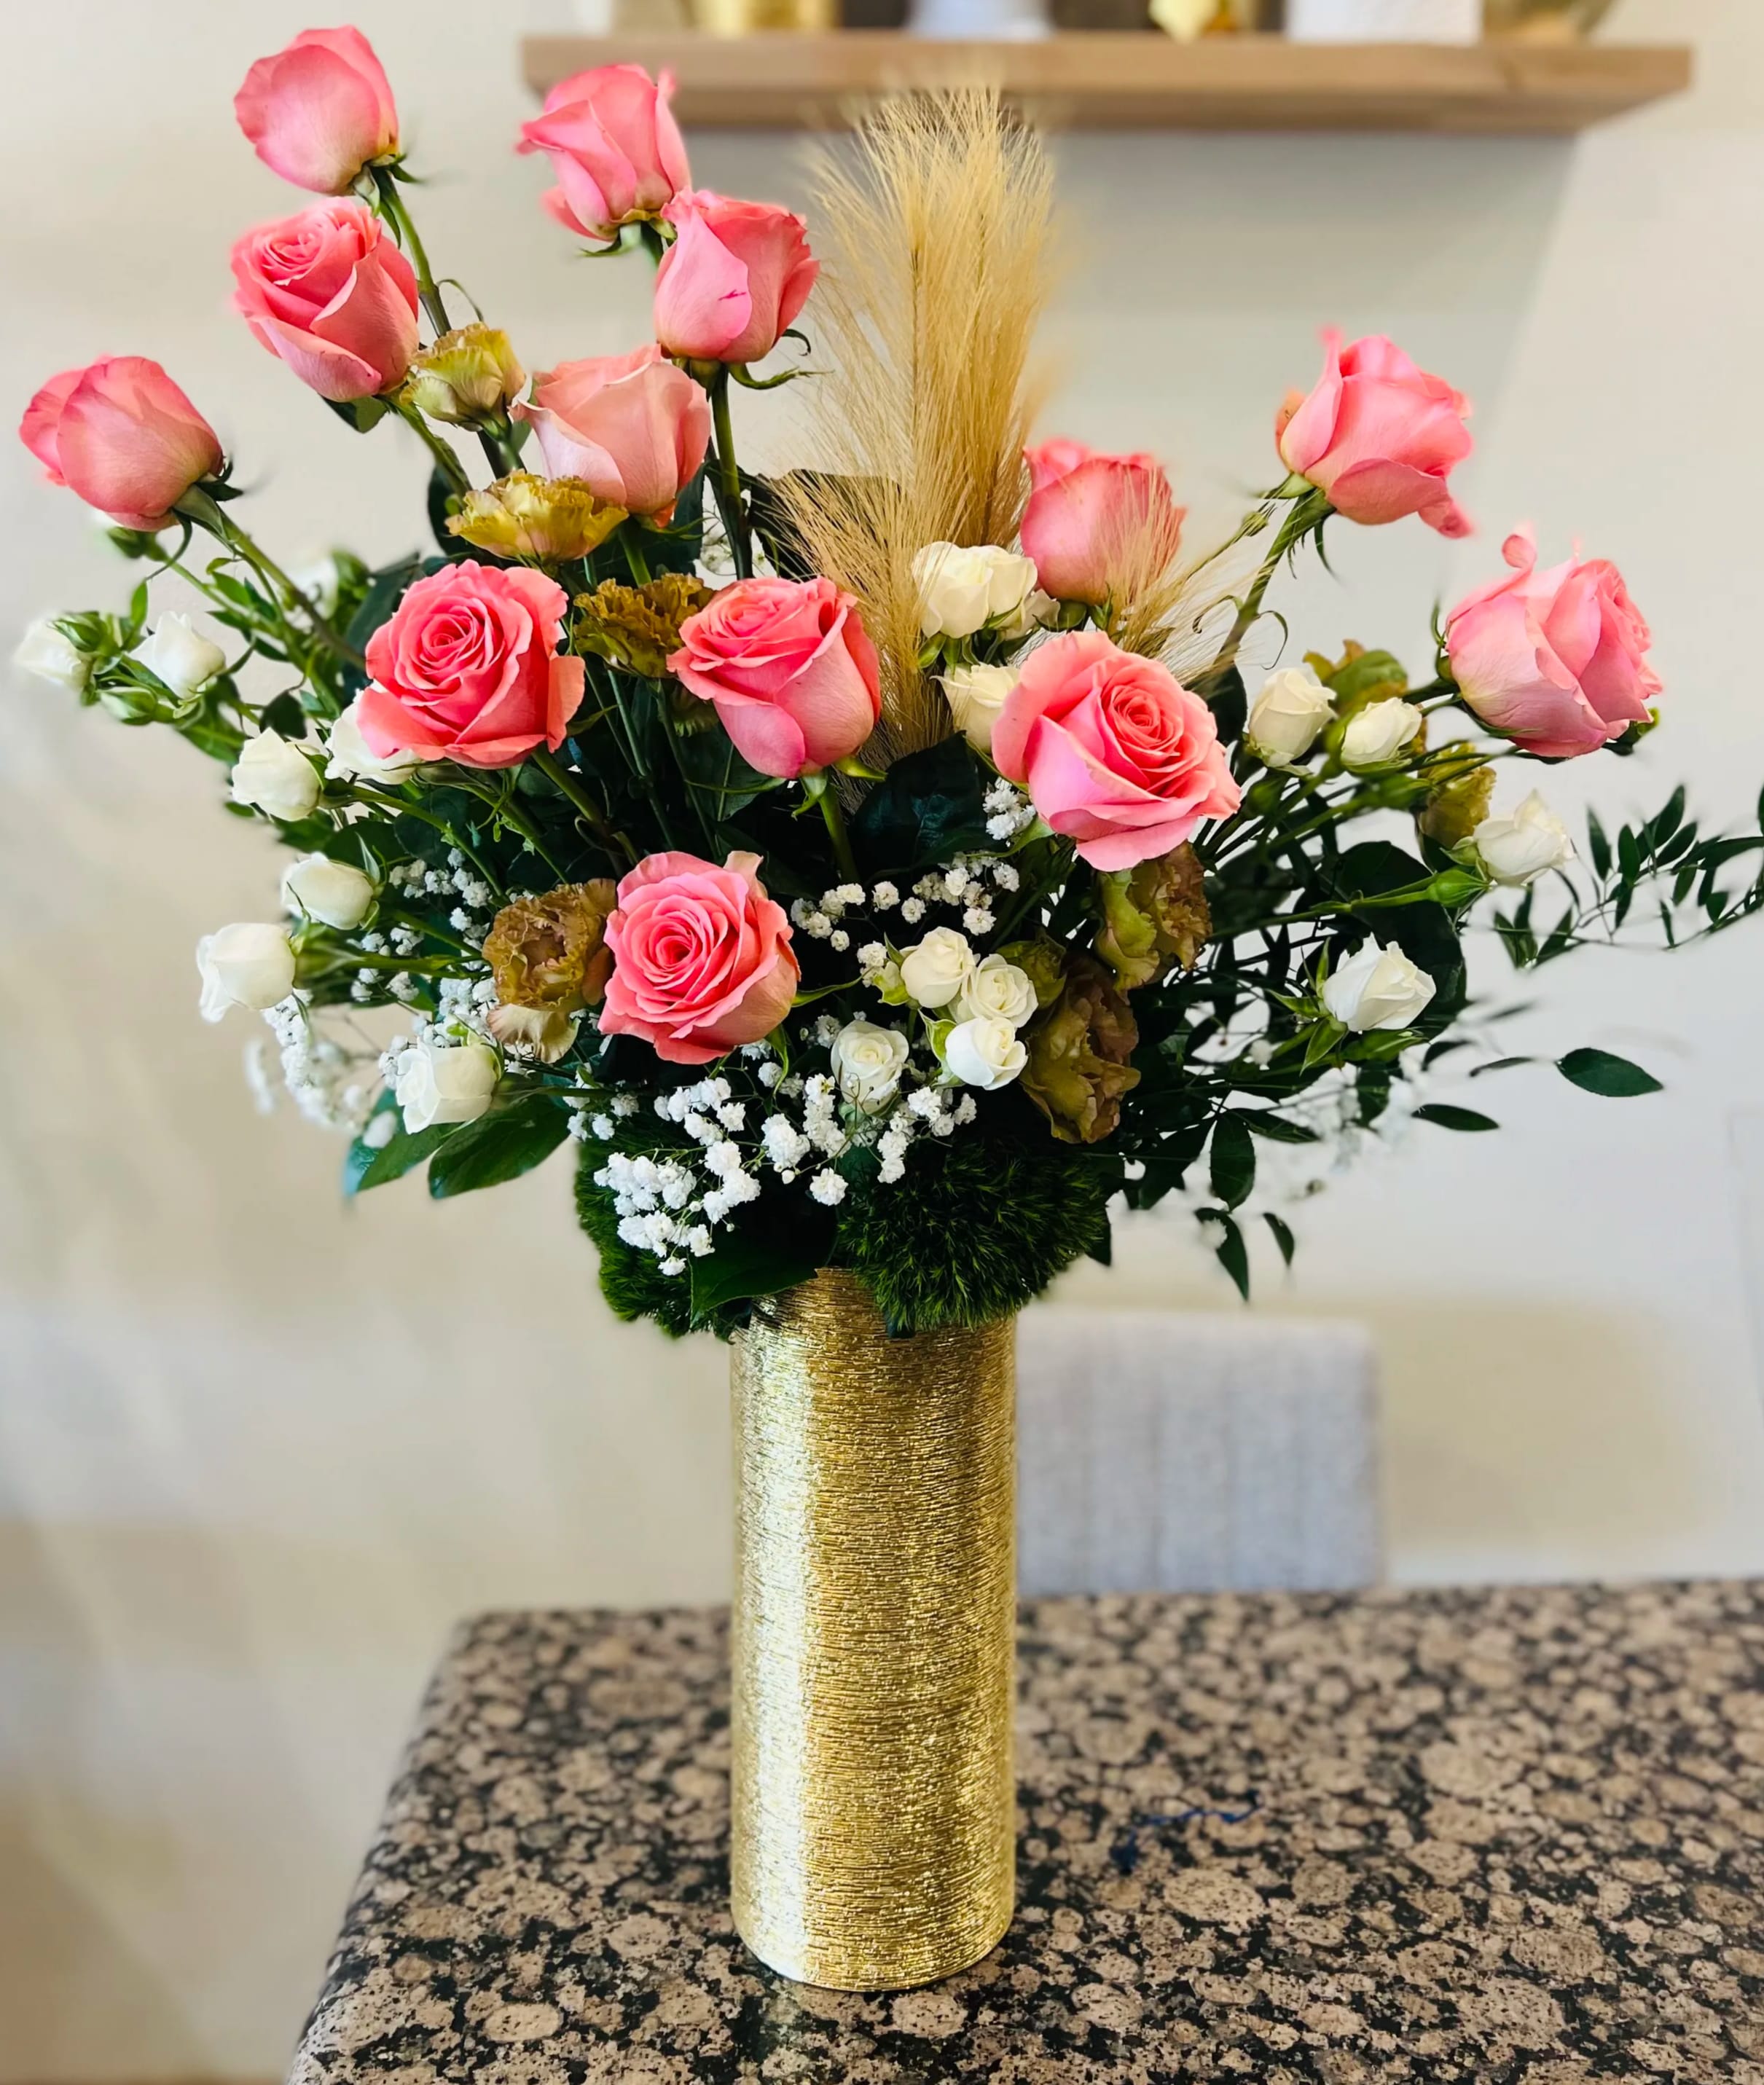 Dozen Roses in Gold Vase (any color available) - Beautifully arranged long stem Roses with Spray Roses and Lisianthus in stunning gold vase.  Other colored roses available 